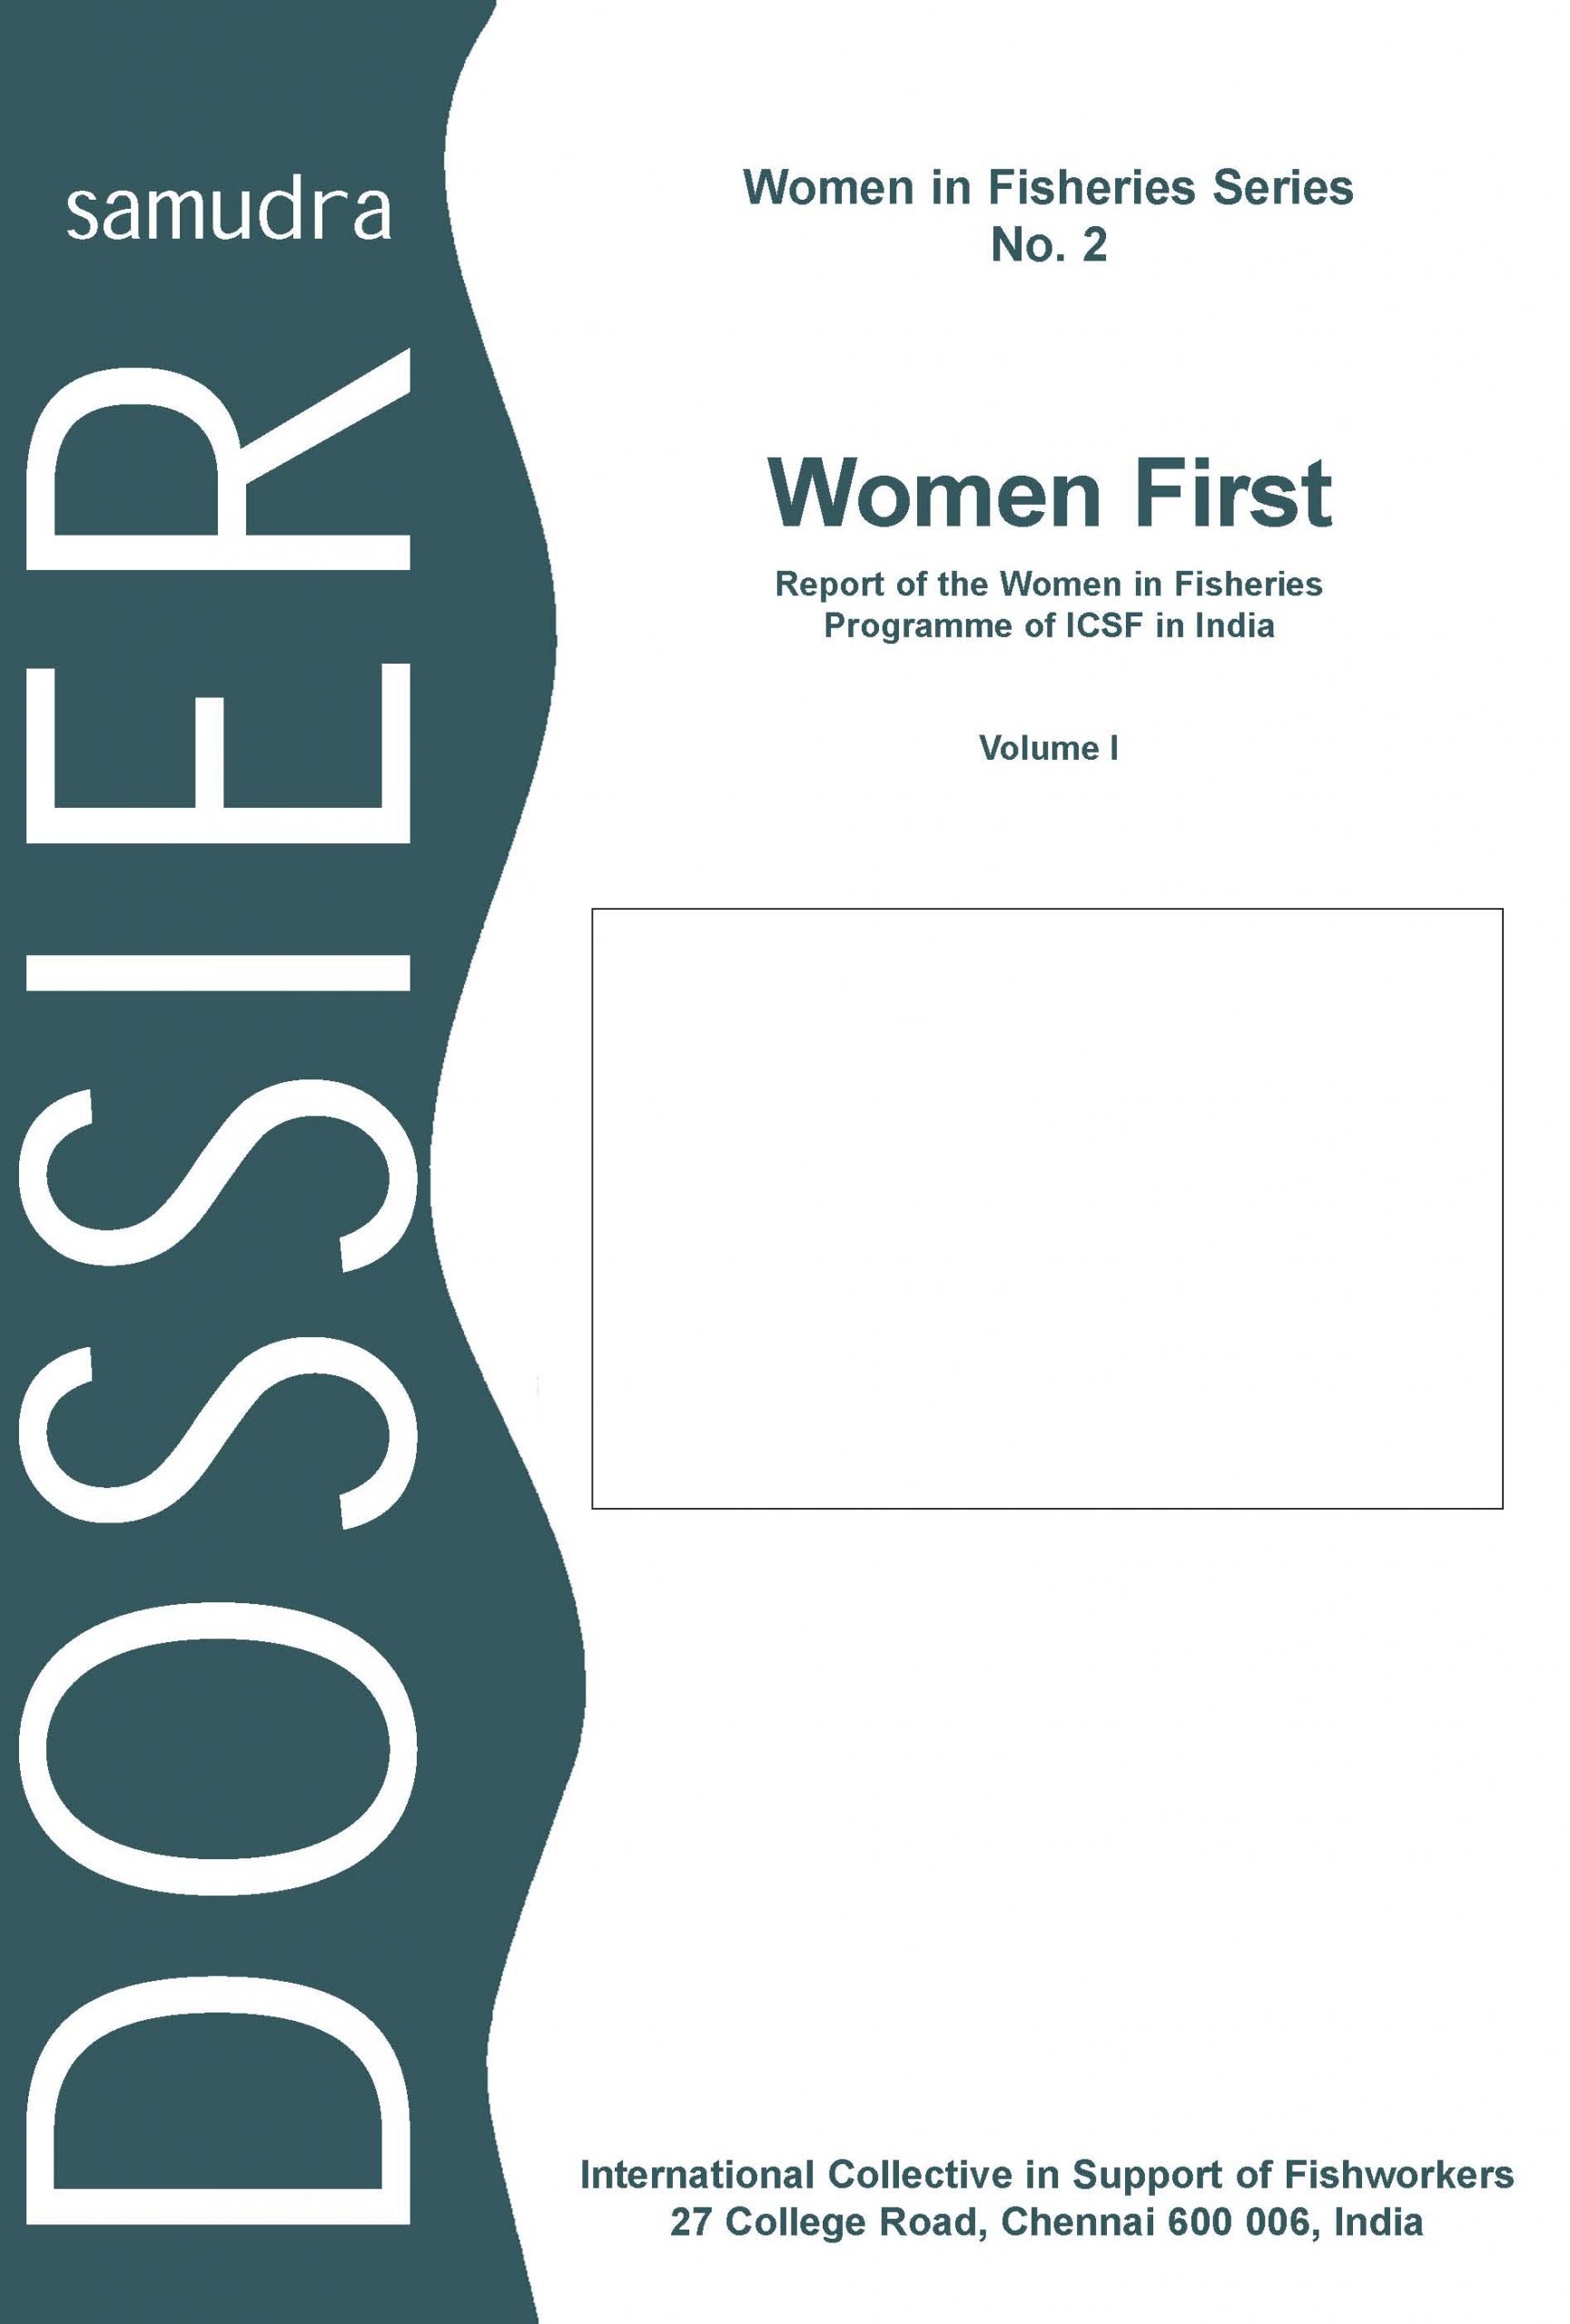 Women First: Report of the Women in Fisheries Programme of the ICSF in India, Volume 1 – Women in Fisheries No.2